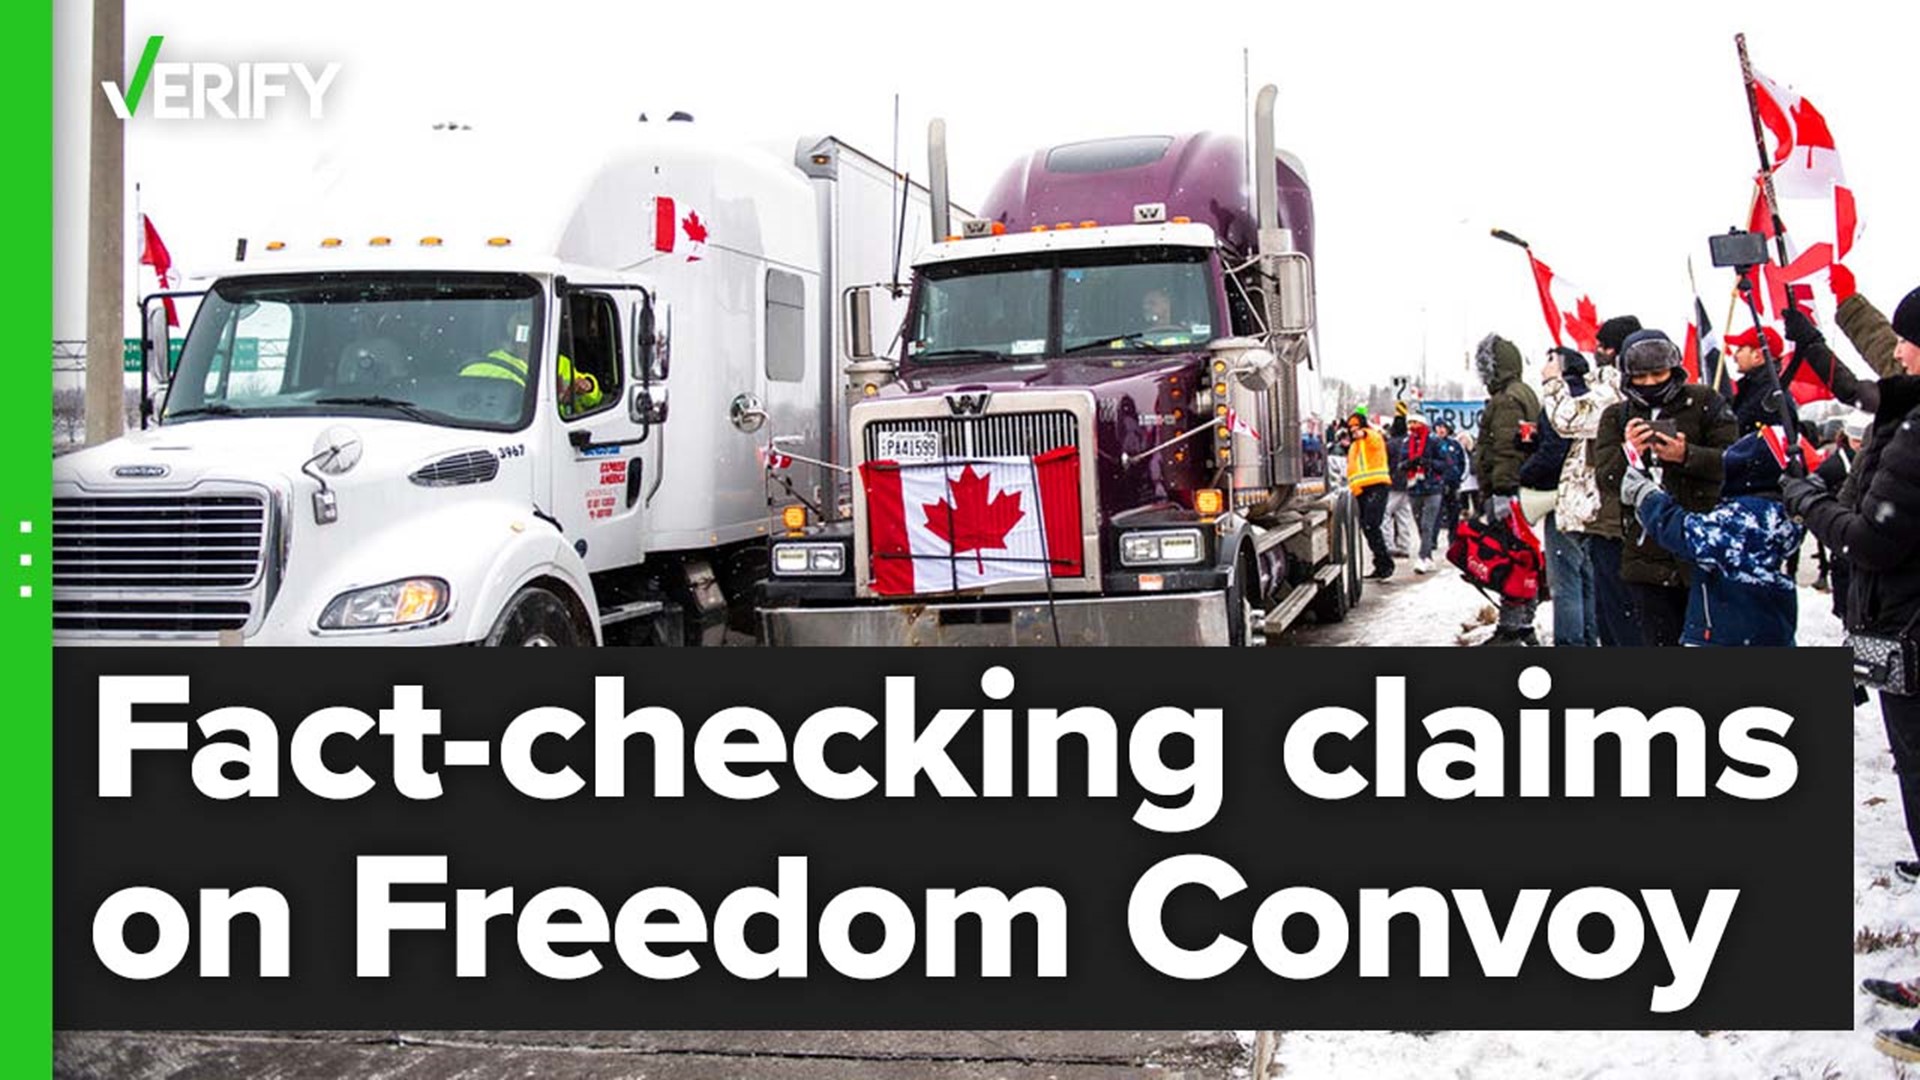 Fact-checking claims around the Freedom Convoy